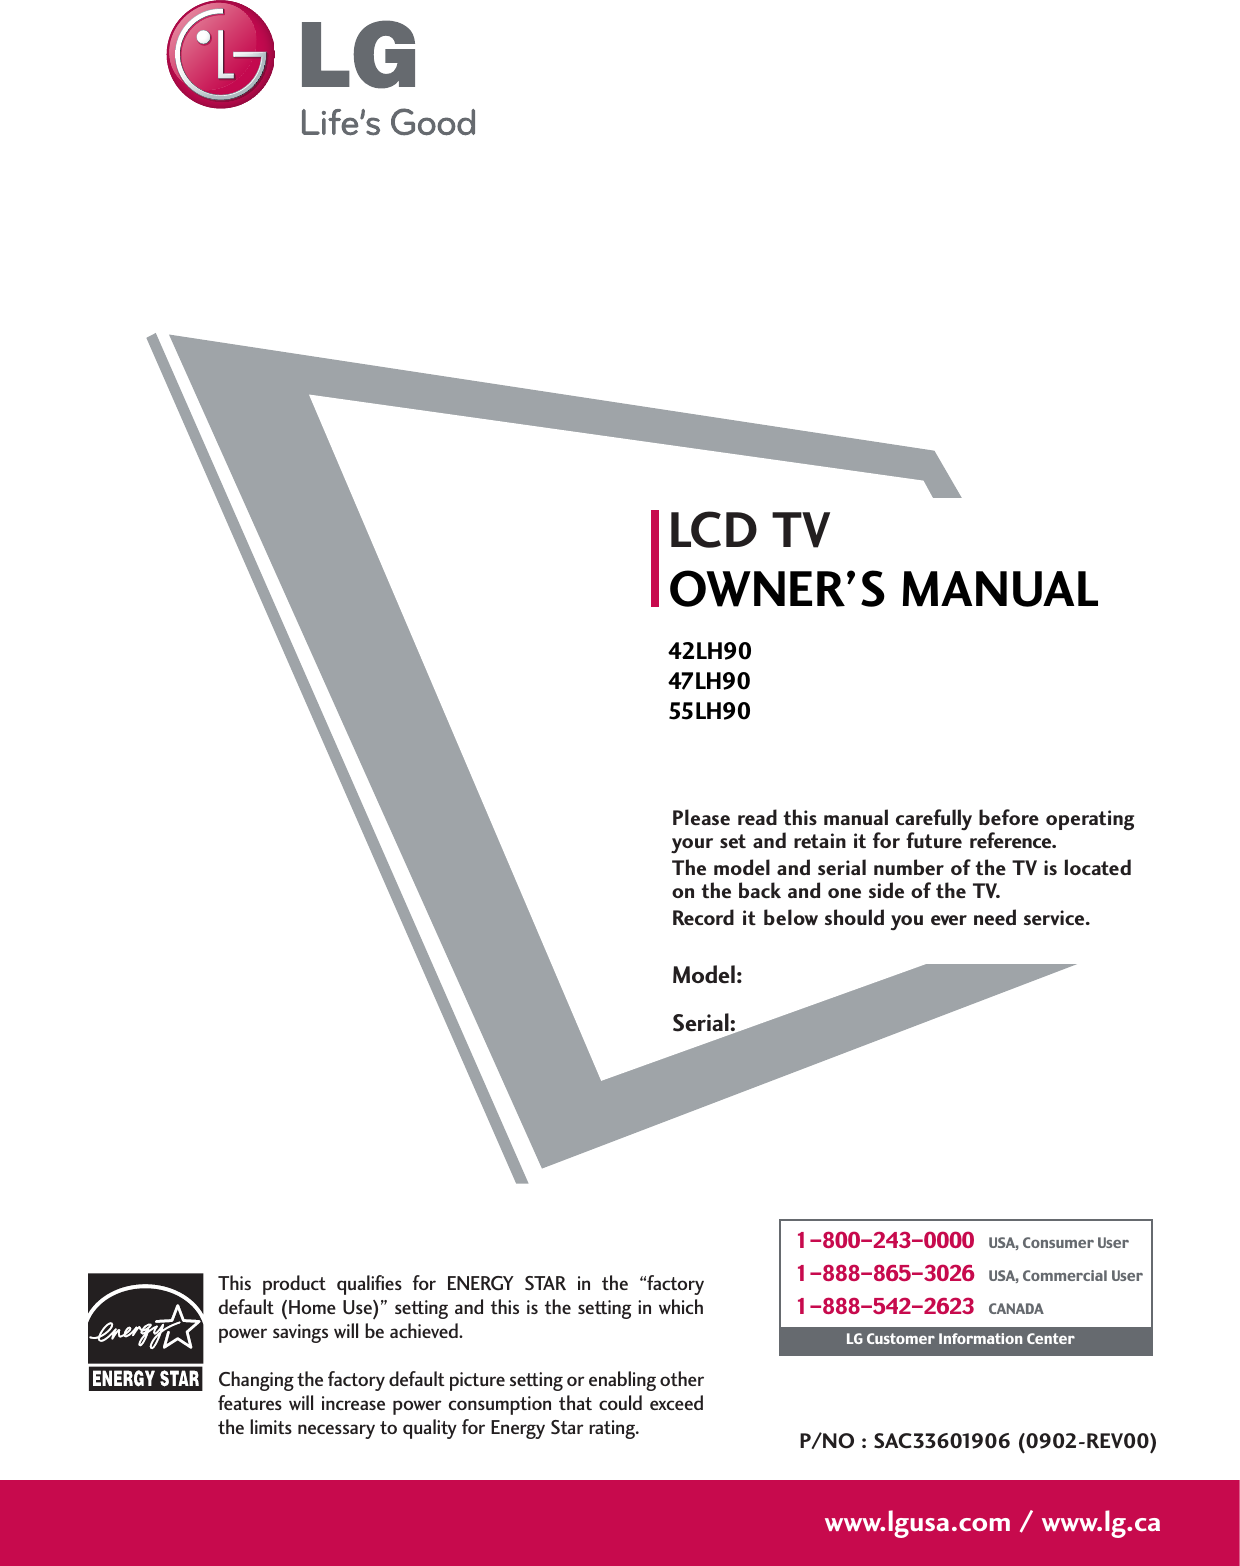 Please read this manual carefully before operatingyour set and retain it for future reference.The model and serial number of the TV is locatedon the back and one side of the TV. Record it below should you ever need service.LCD TVOWNER’S MANUAL42LH9047LH9055LH90P/NO : SAC33601906 (0902-REV00)www.lgusa.com / www.lg.caThis  product  qualifies  for  ENERGY  STAR  in  the  “factorydefault (Home Use)” setting and this is the setting in whichpower savings will be achieved.Changing the factory default picture setting or enabling otherfeatures will increase power consumption that could exceedthe limits necessary to quality for Energy Star rating.Model:Serial:1-800-243-0000   USA, Consumer User1-888-865-3026   USA, Commercial User1-888-542-2623   CANADALG Customer Information Center